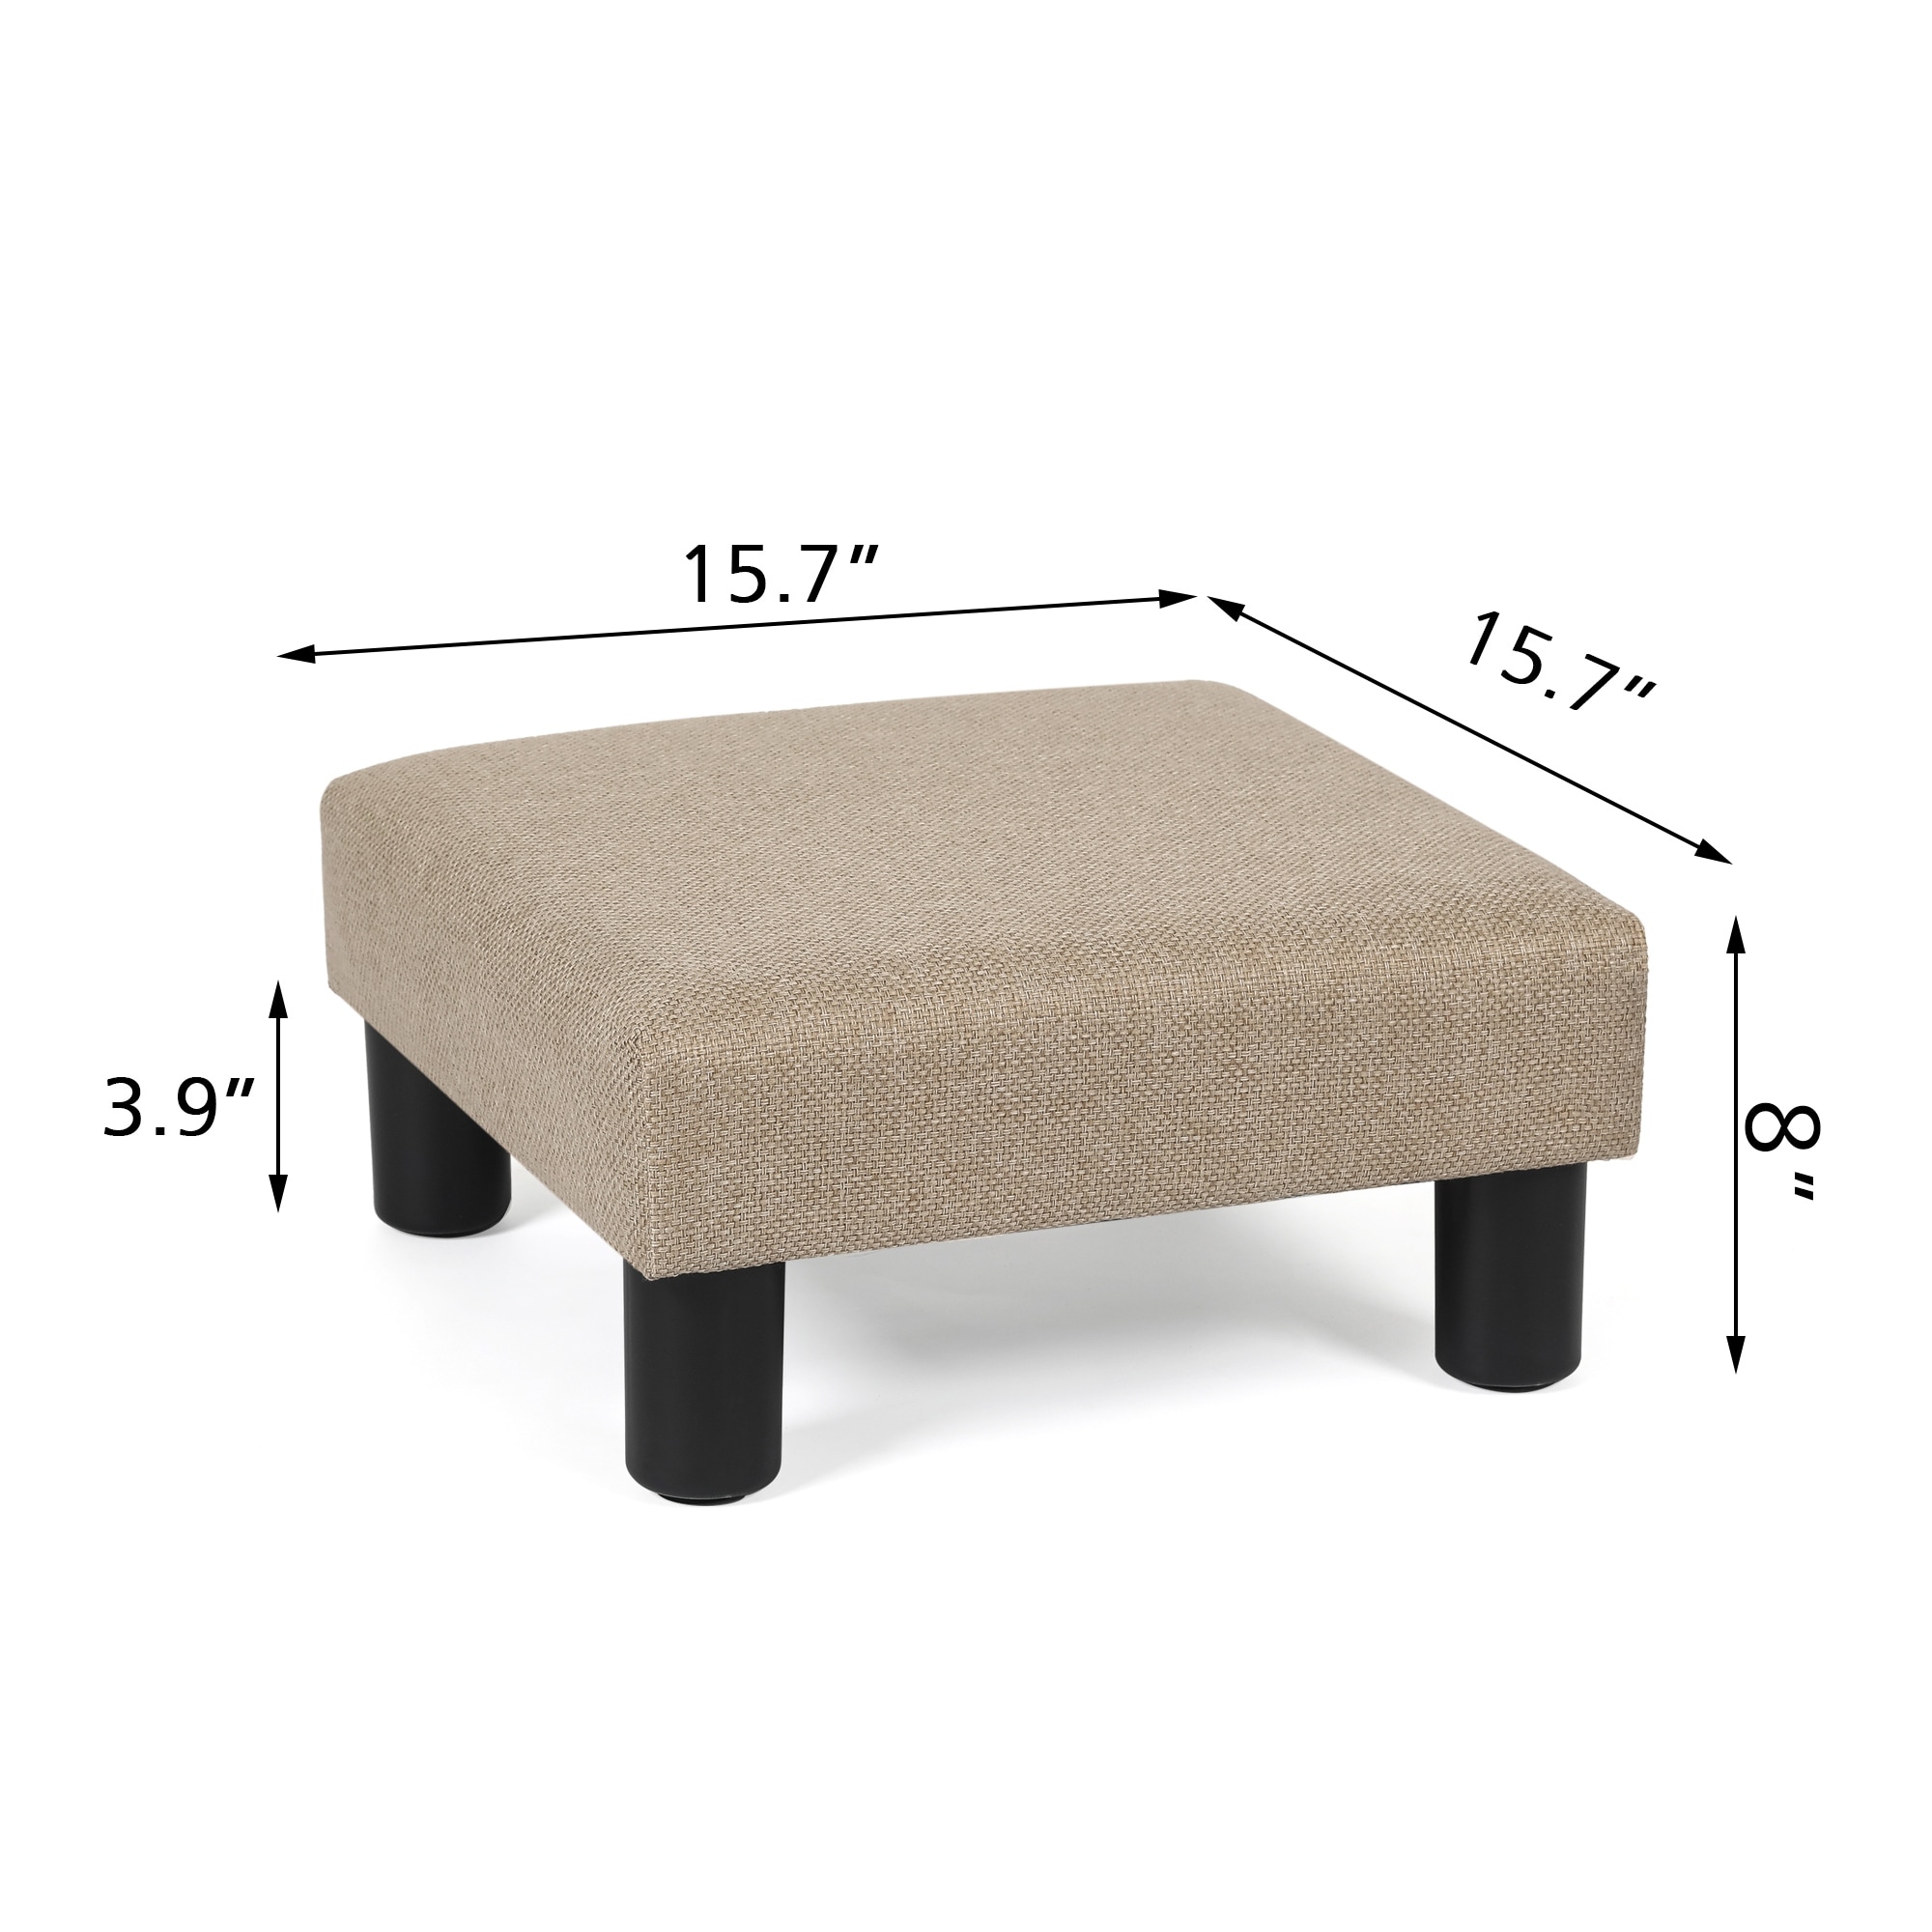 Joveco Small Foot Stool Ottoman,Fabric Footrest with Wood Legs,Soft Step  Stool,Under Desk Stool Home Living Room Bedroom Cloakroom 